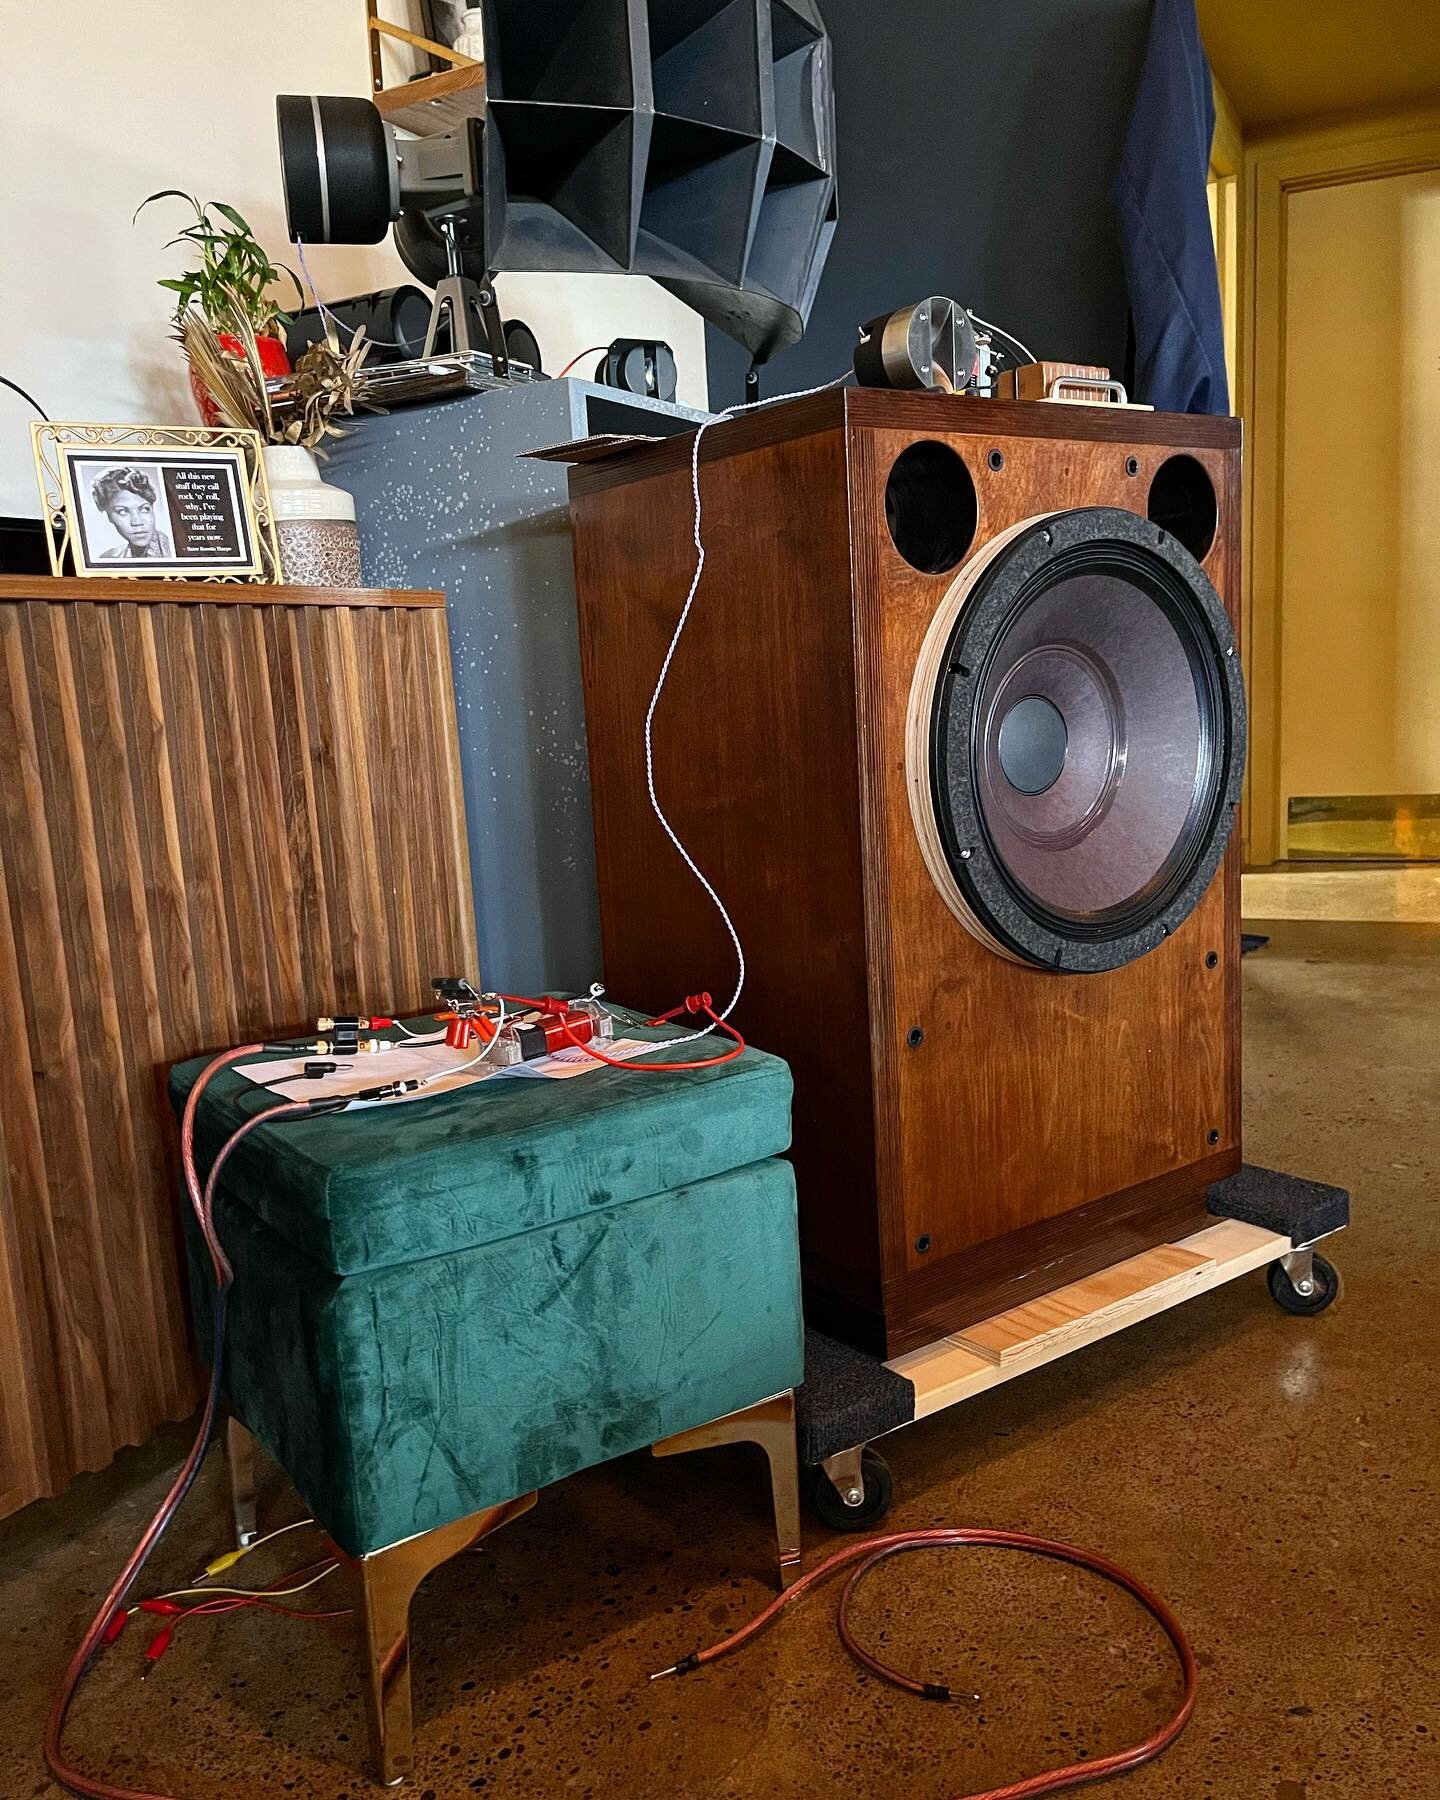 I went to @decibel_drinks and got a little nerdy with my client and Eddy from Eurotubes to hear some electrical magic he has created. We&rsquo;re retrofitting Great Plains Audio biflex drivers into a couple of smaller vintage cabinets so Eddy was kin